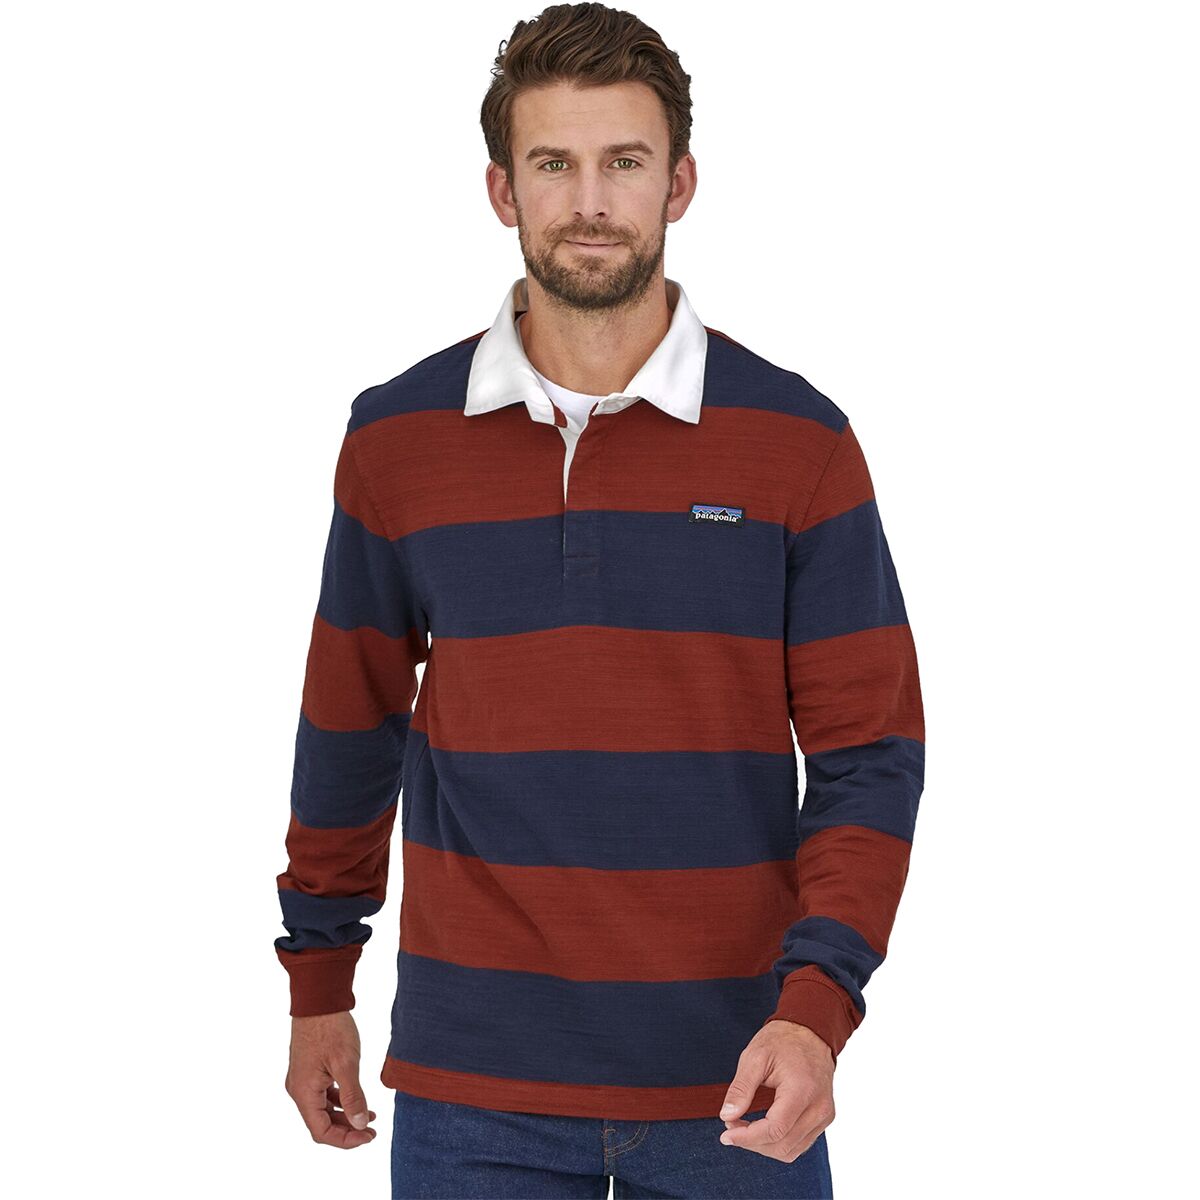 Patagonia Lightweight Rugby Long-Sleeve Shirt - Men's - Clothing